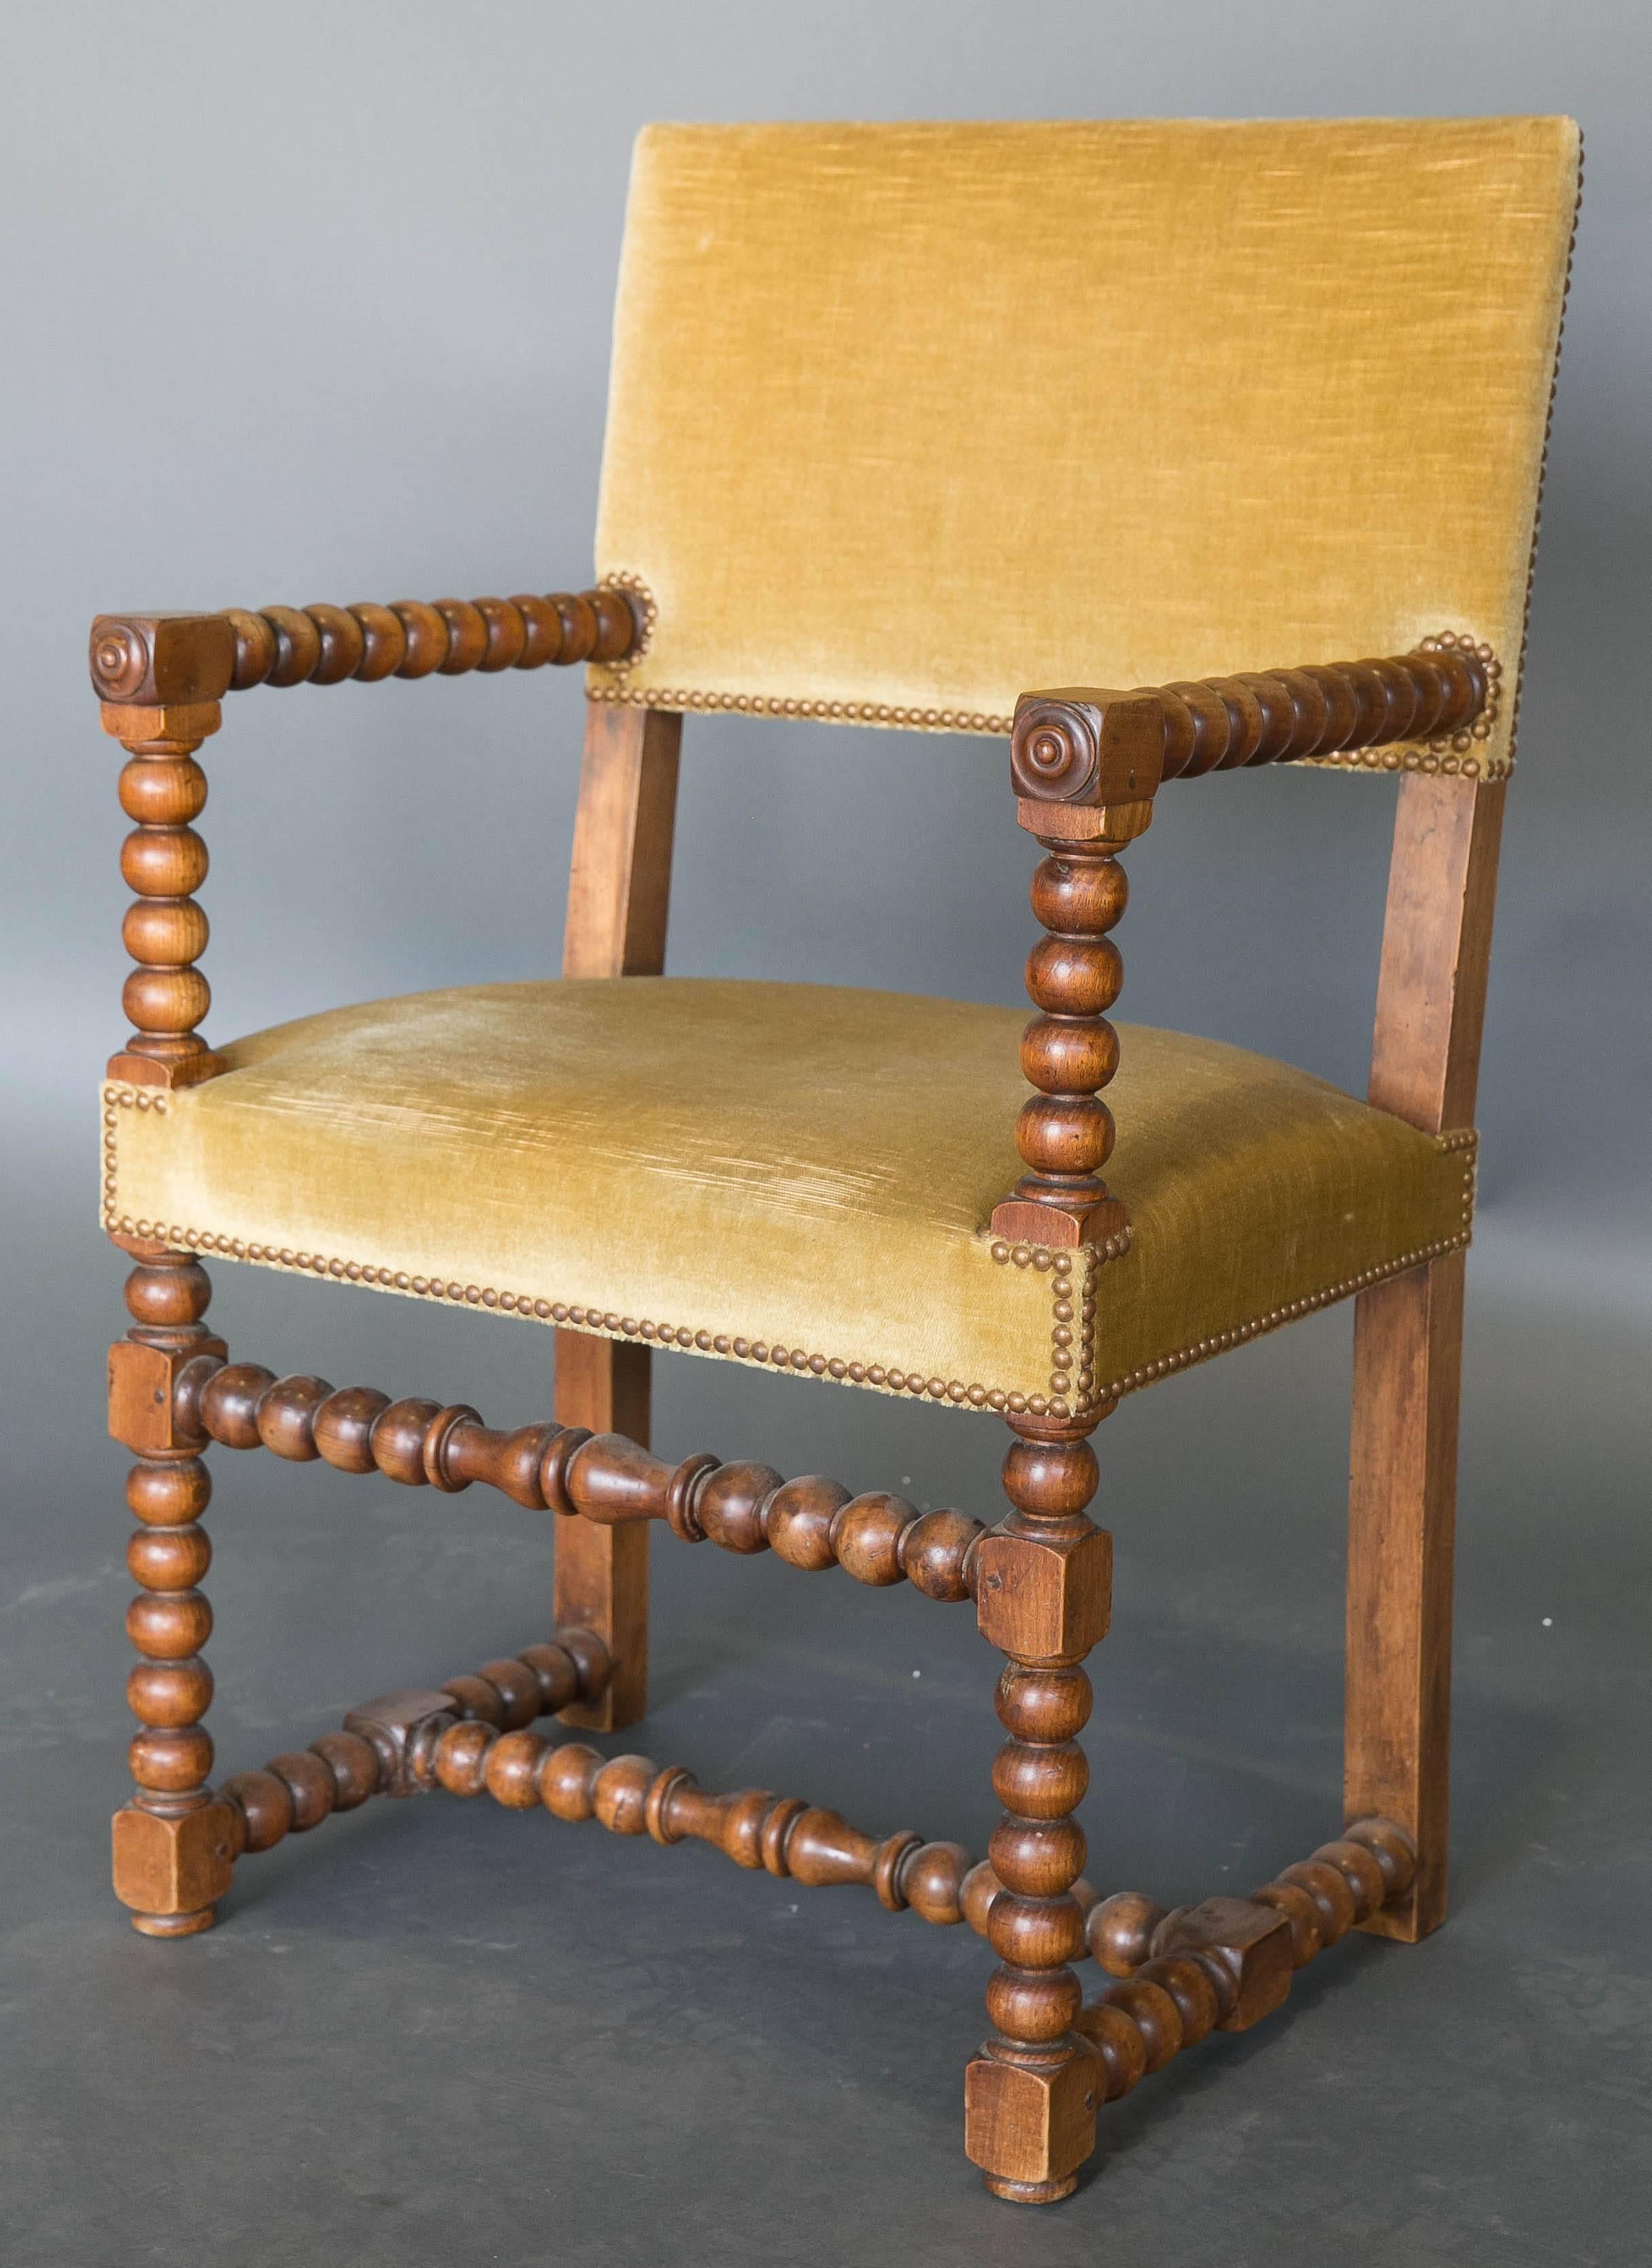 Pair of 19th century carved walnut Bobbin chairs with a single stretcher.